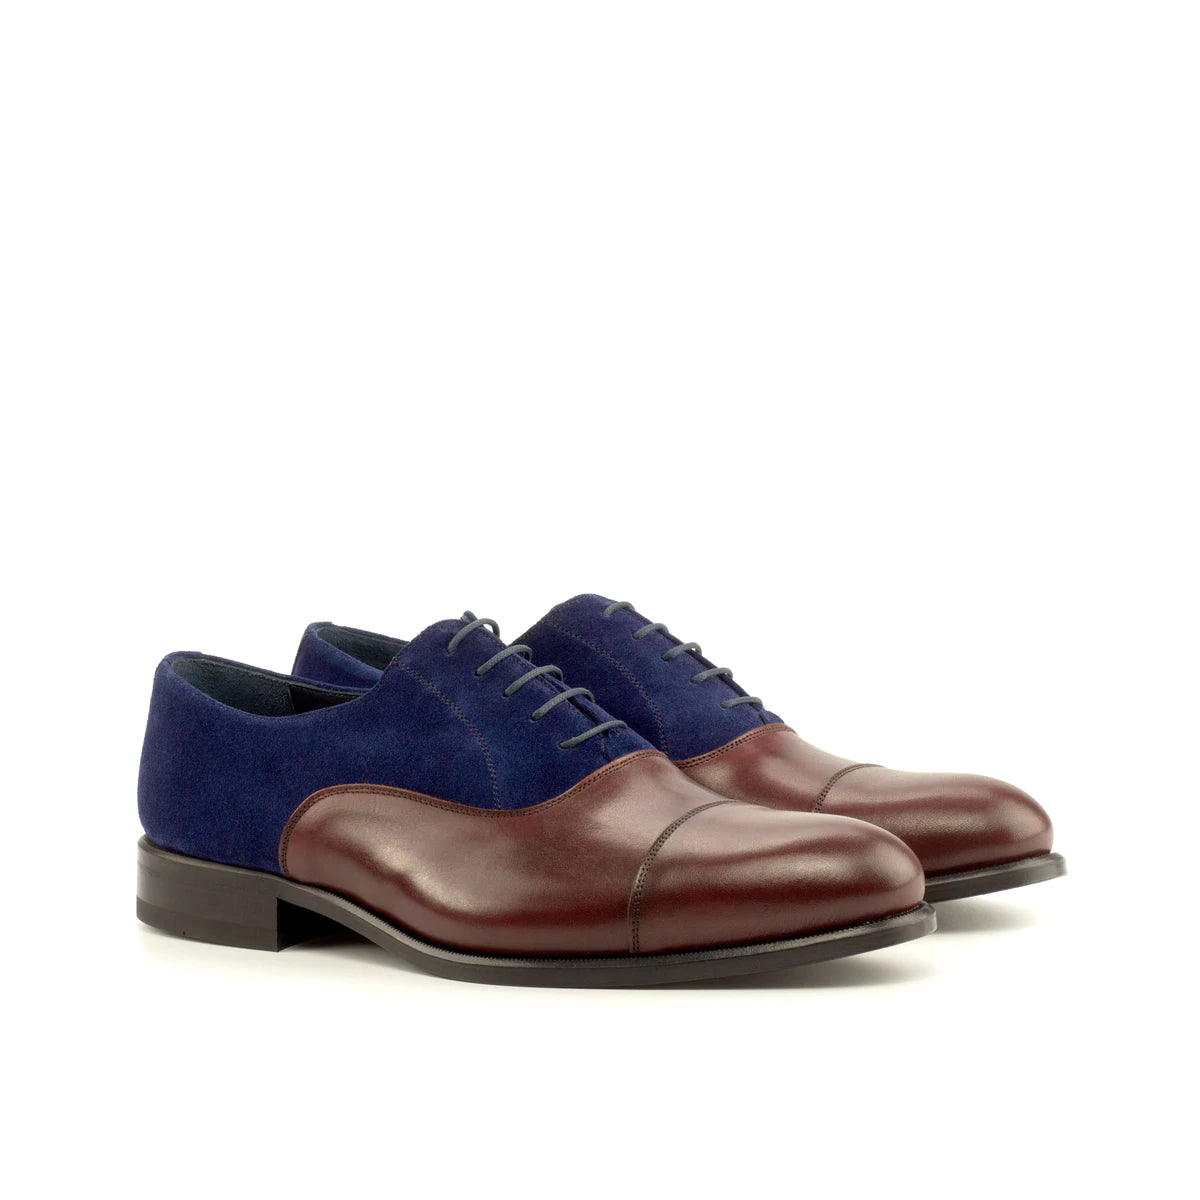 Toe Cap Oxford - Burgundy with Luxury Suede - KING'S